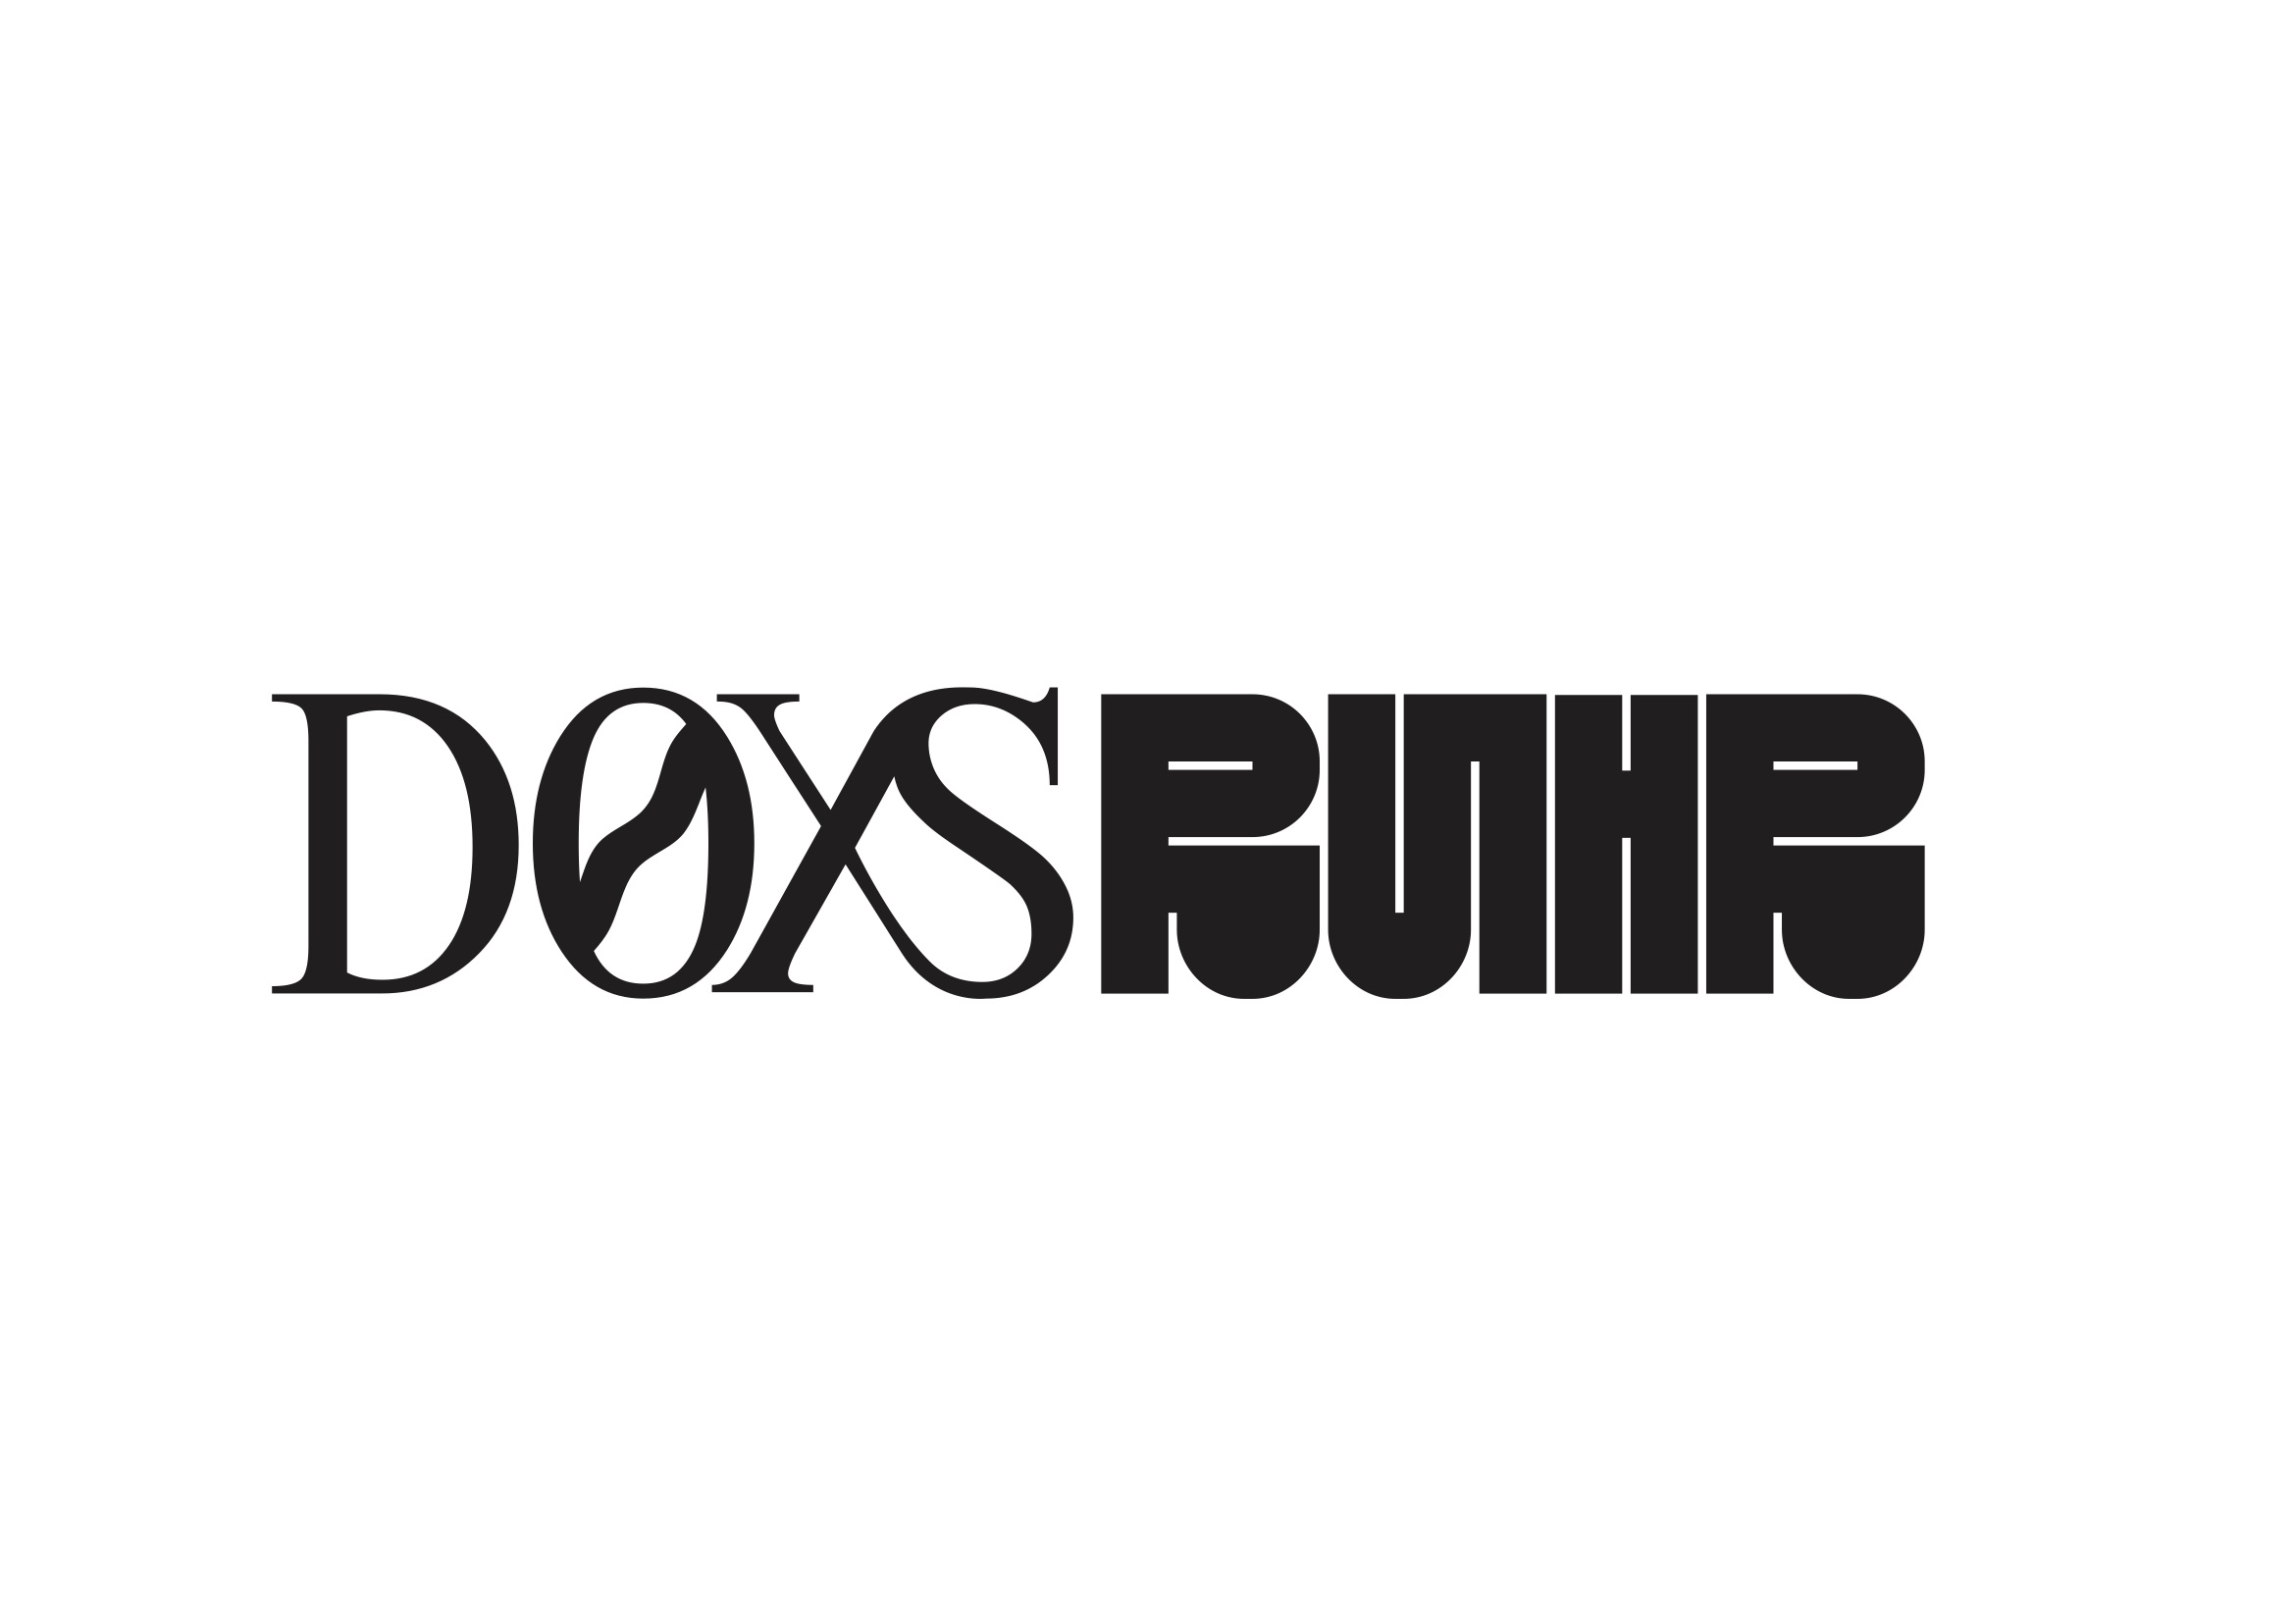 doxs ruhr